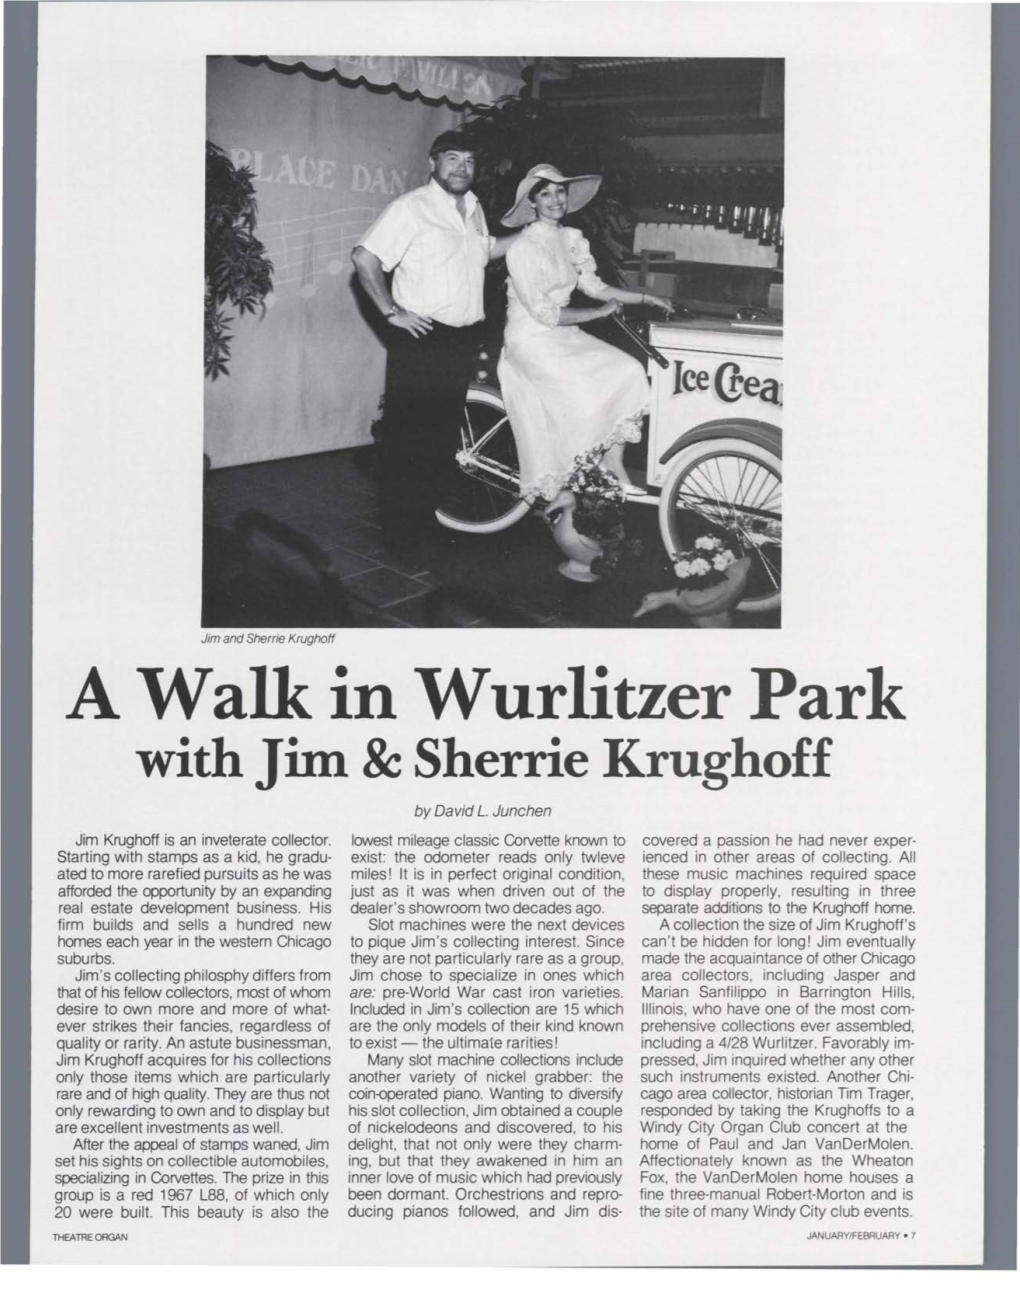 A Walle in Wurlitzer Park with Jim& Sherrie Krughoff by David L